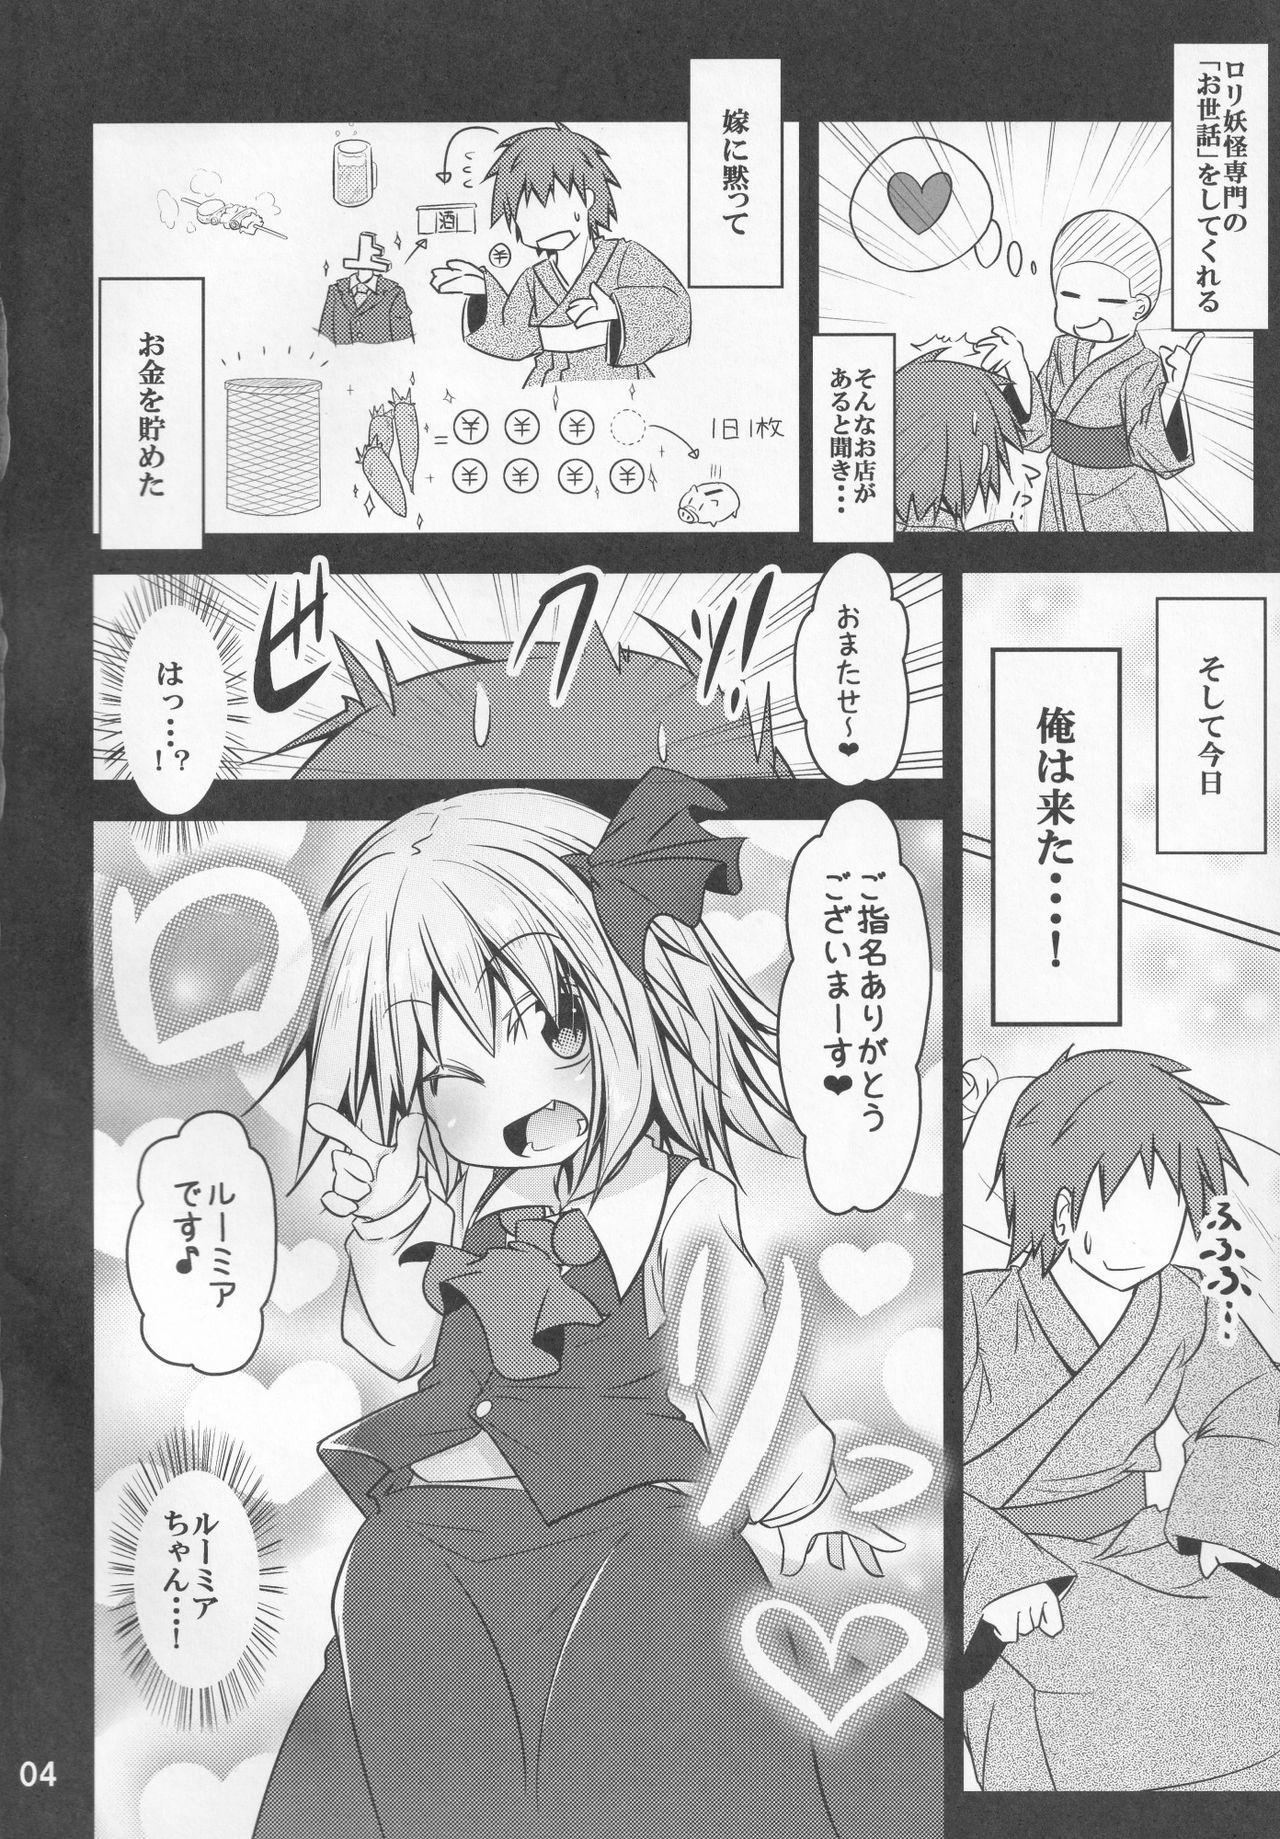 Cutie Youkai Shoukan - Touhou project Bed - Page 3